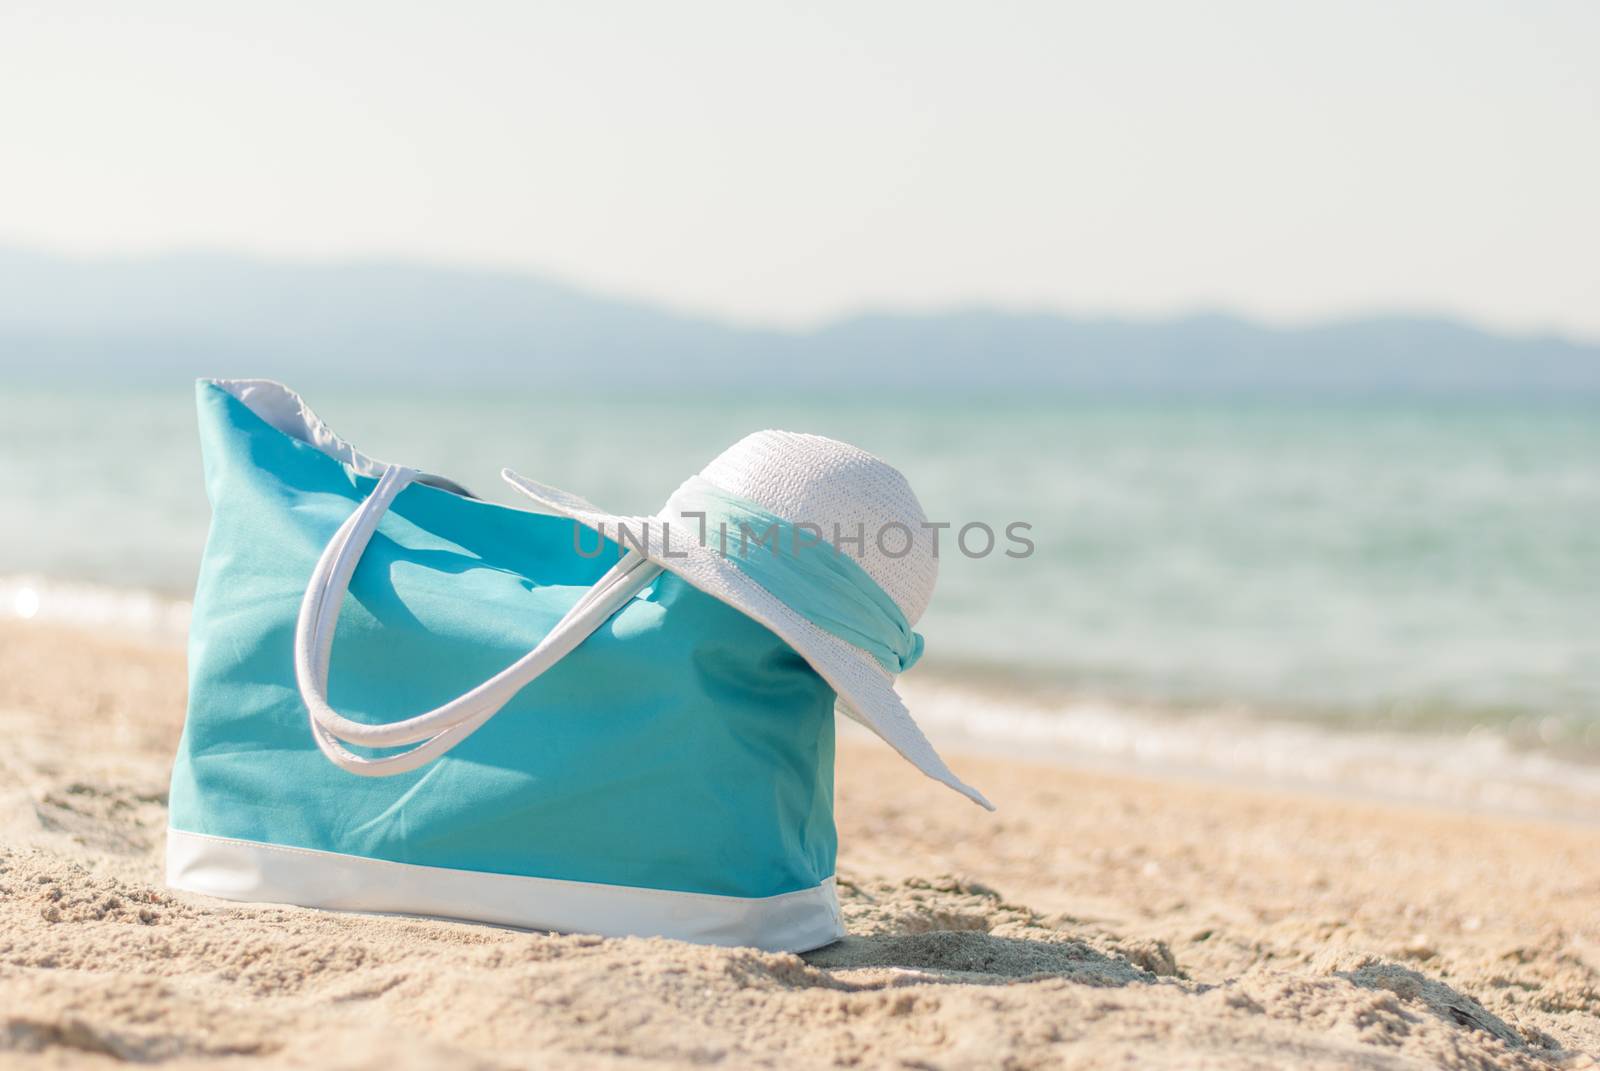 Turquoise bag and white hat on the beach.